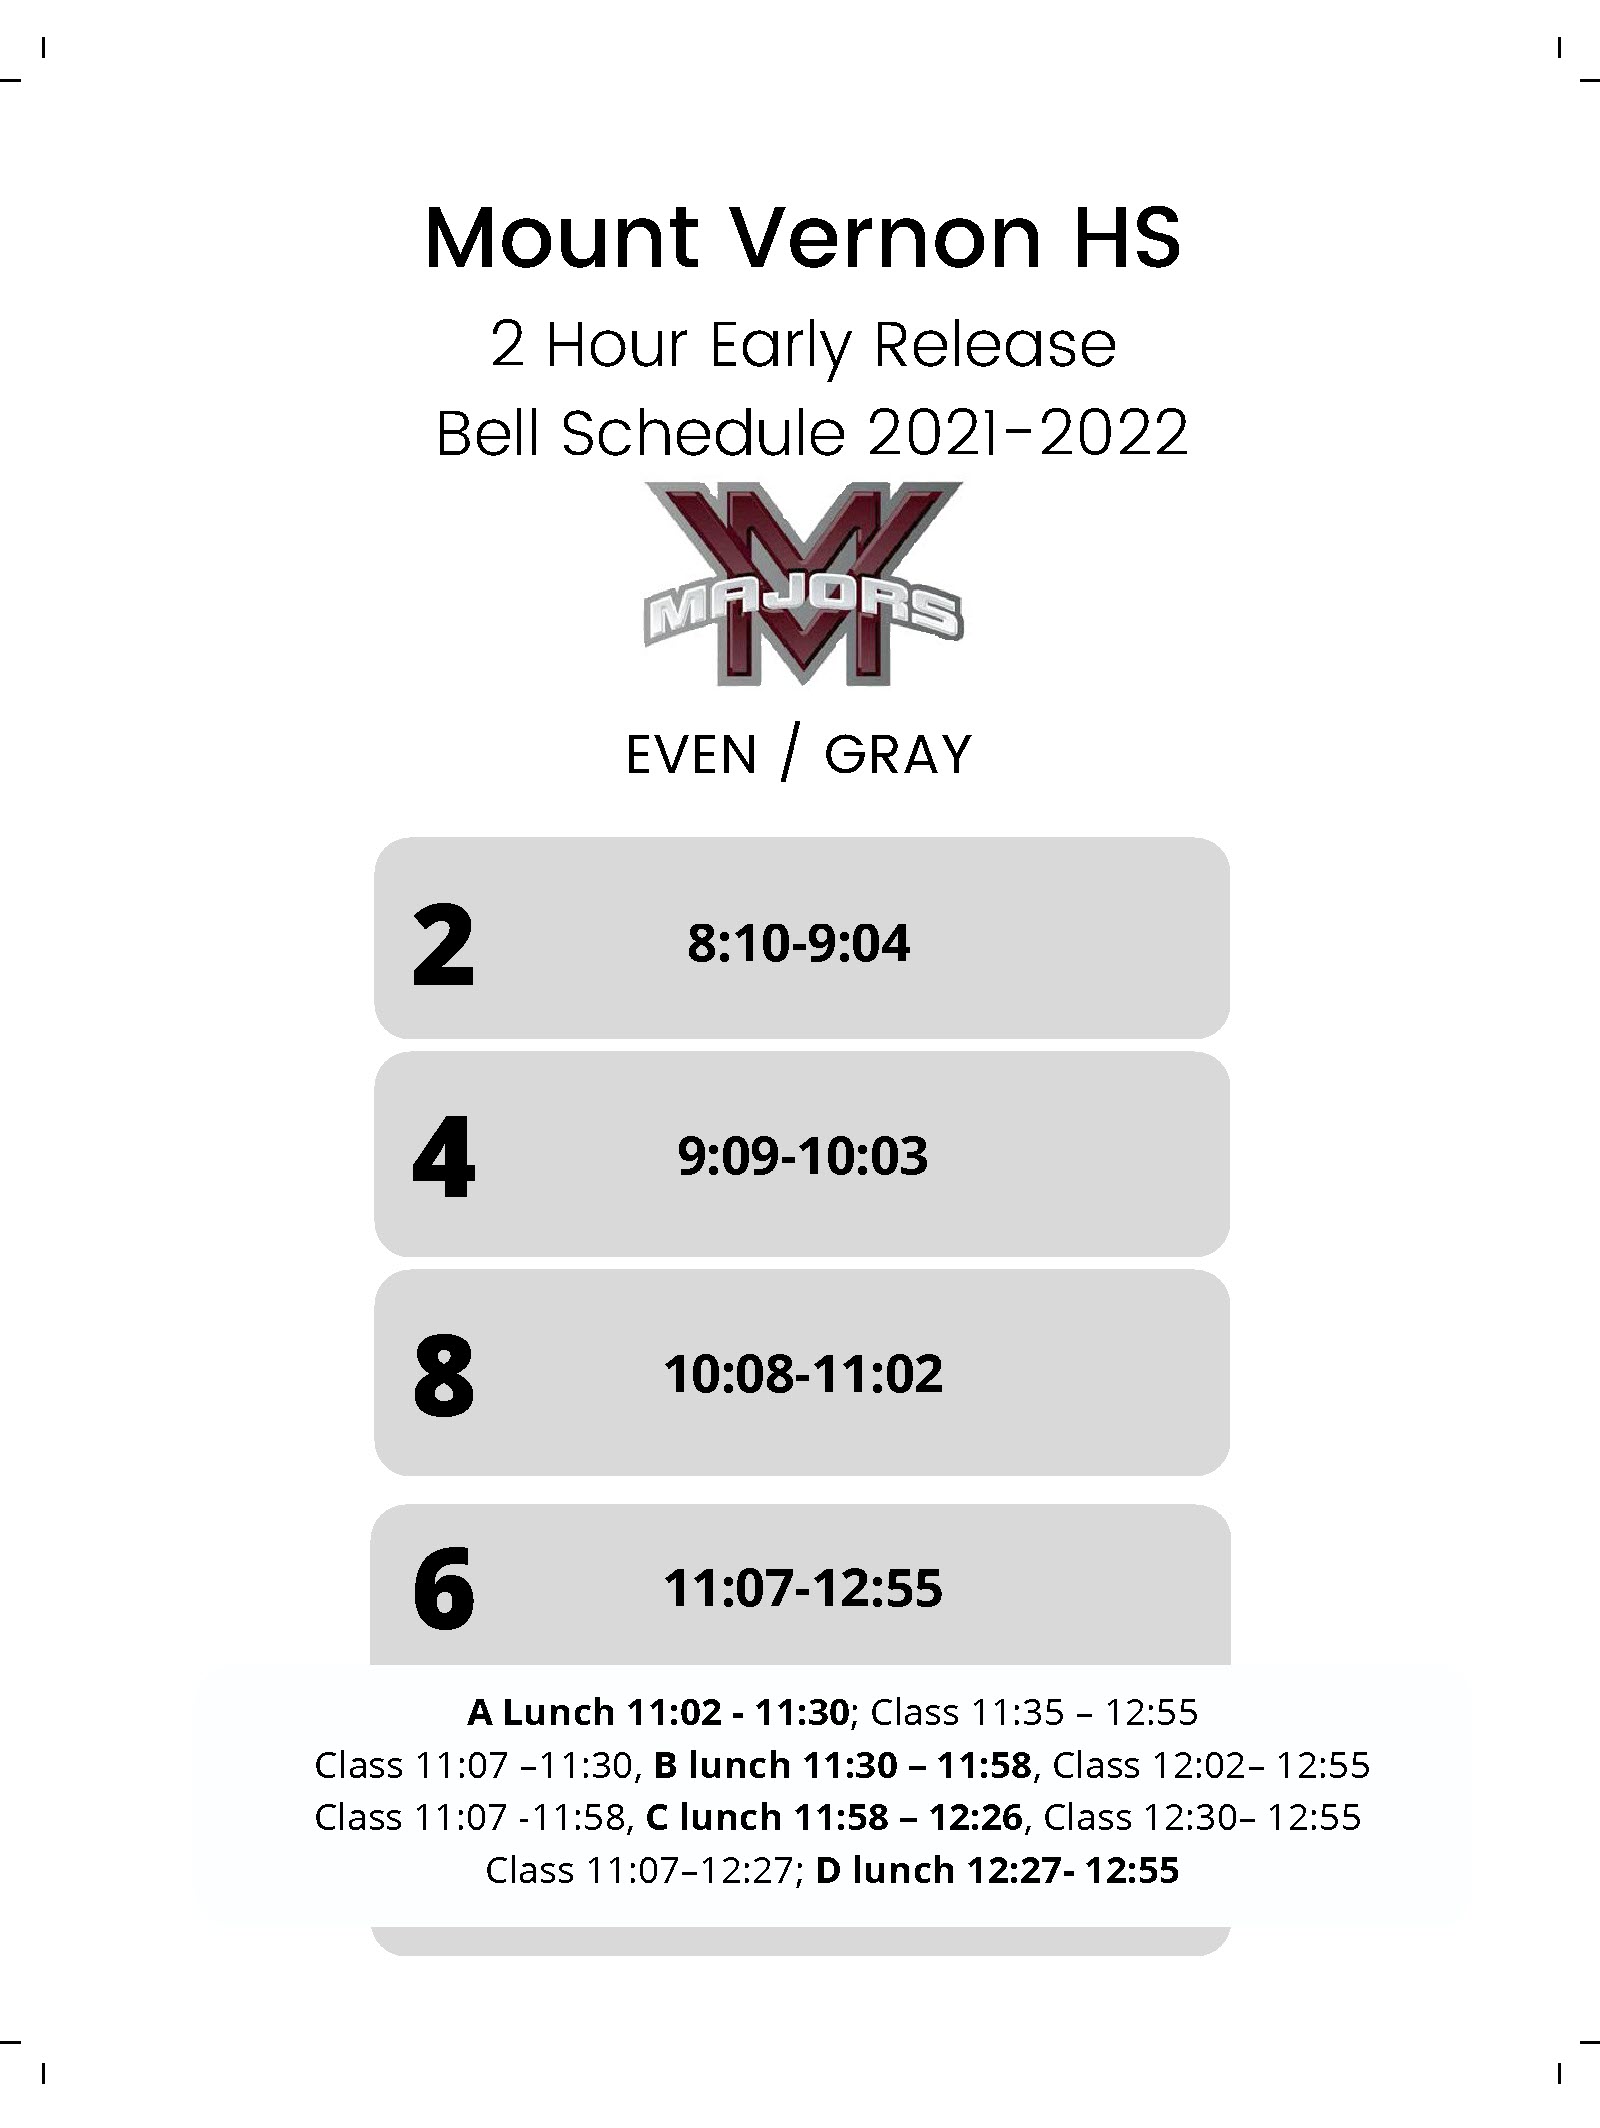 Image of the 2 Hour Early Release schedule